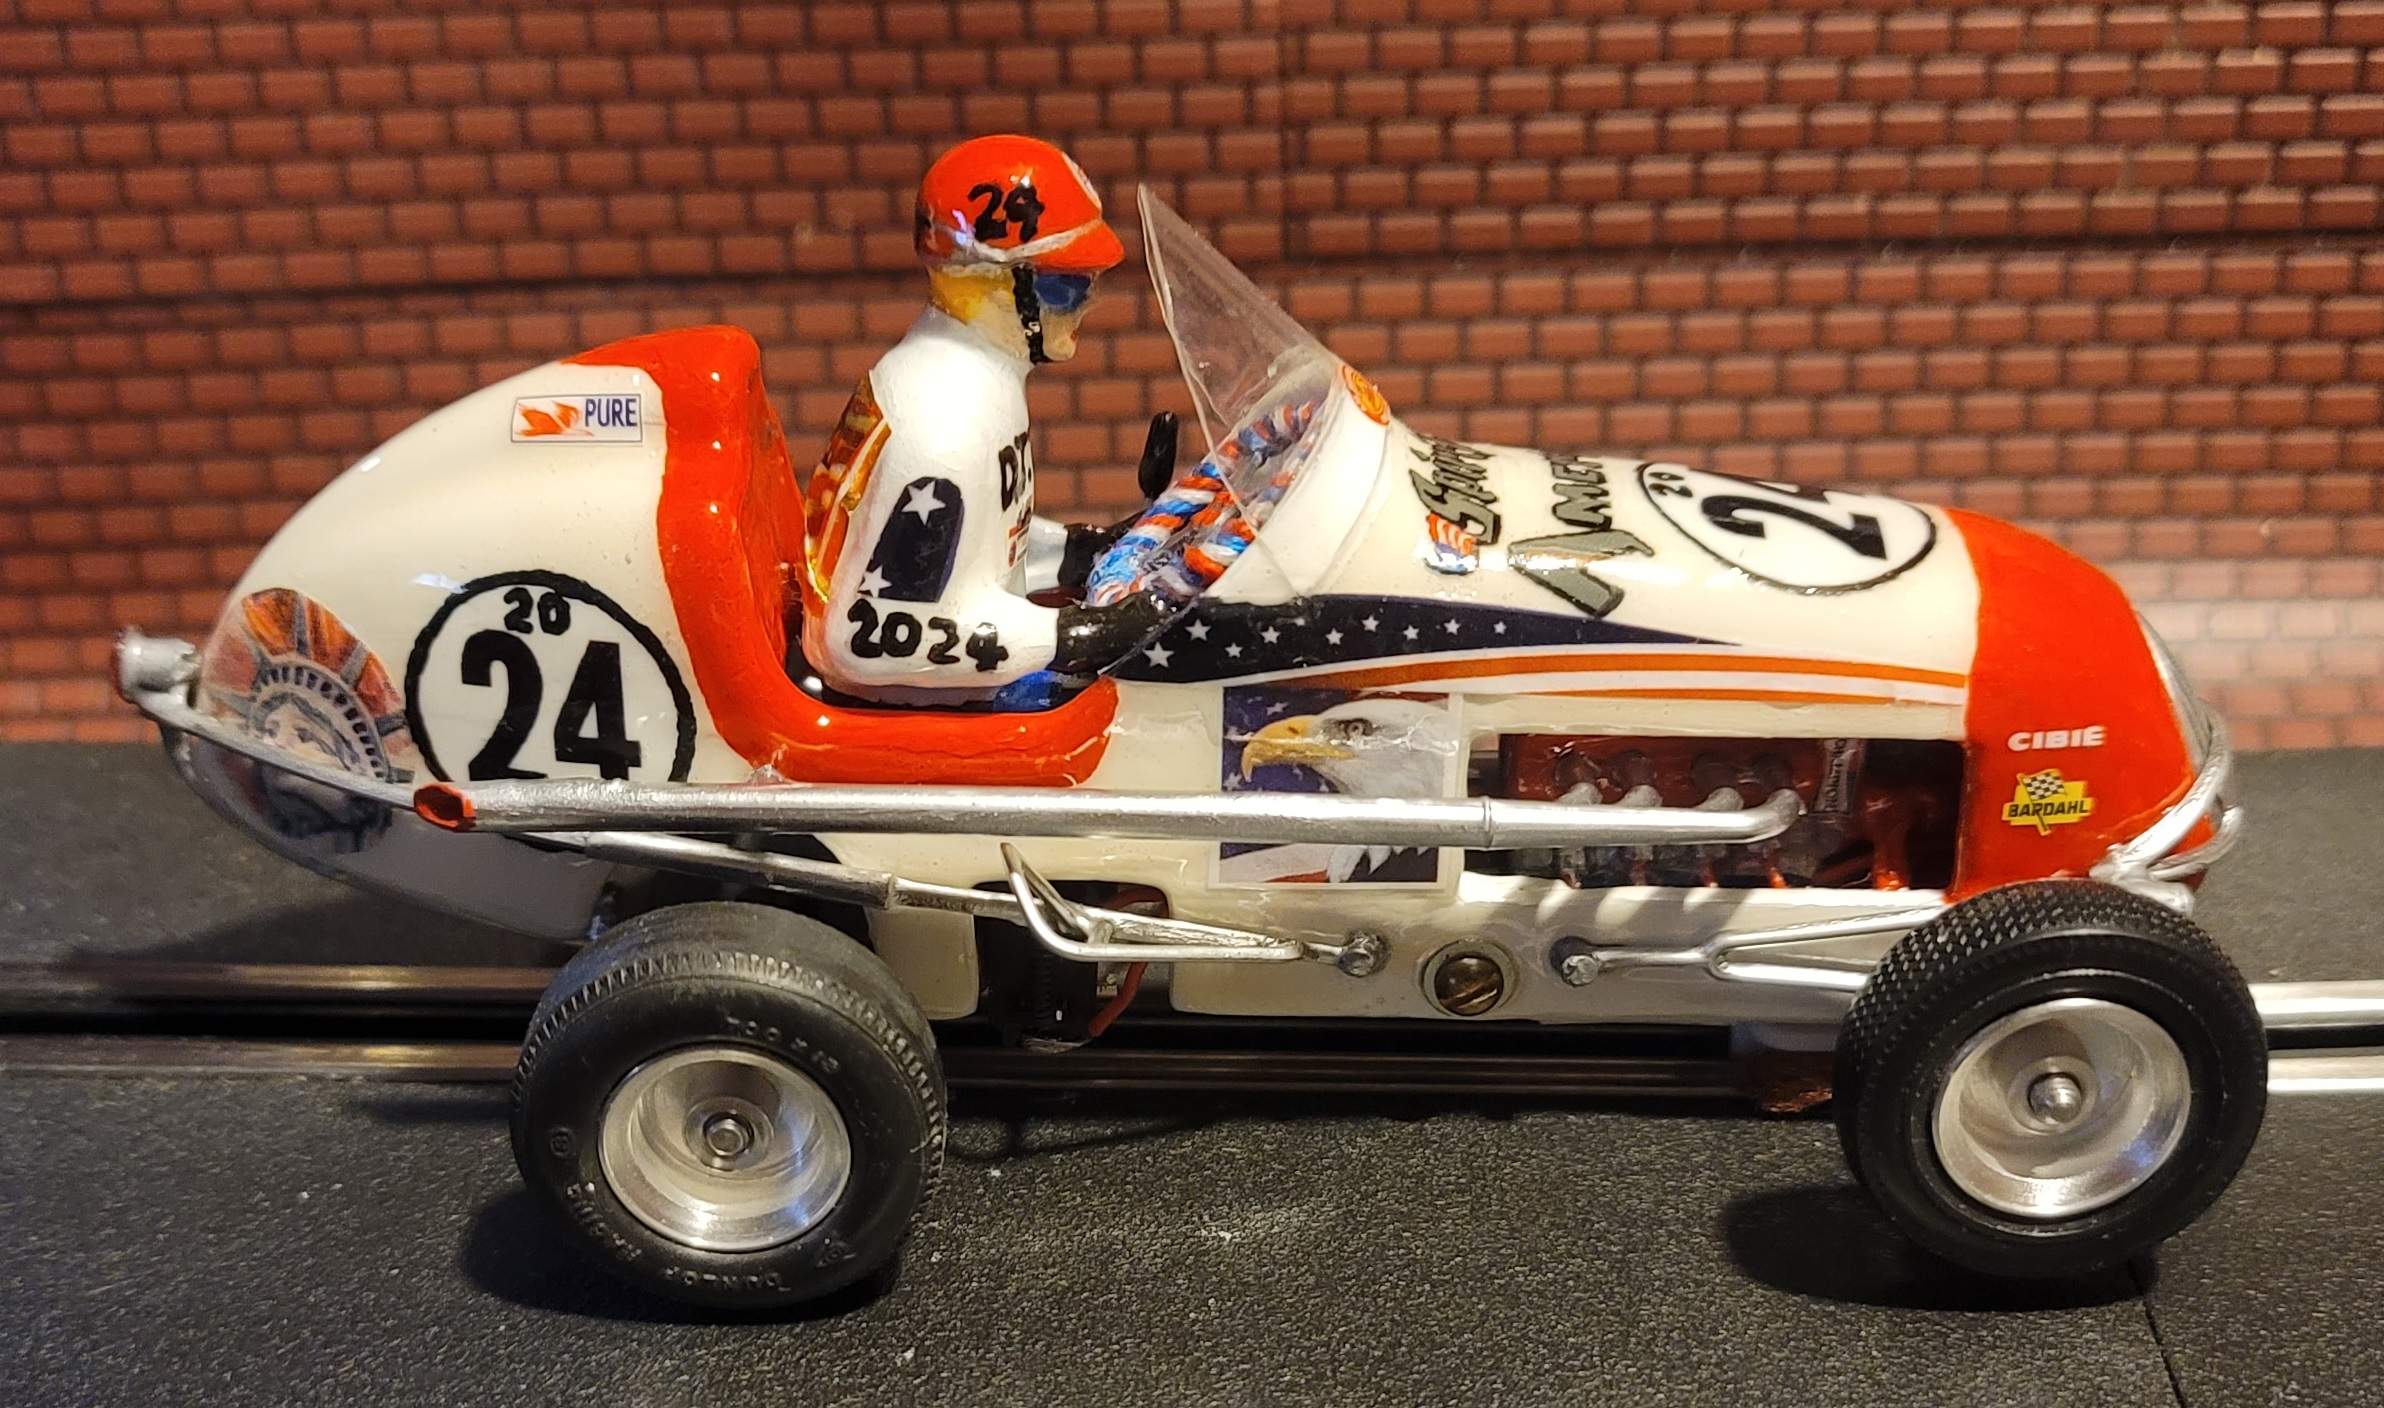 *Sale ENDS Feb 3rd 2024, Get it NOW*, Save $20 off our Ebay $300 Store Sale Price * Monogram Midget Racer “Spirit of America 🇺🇸 24 MkIII” Racing Special 1/24 Scale Slot Car 24